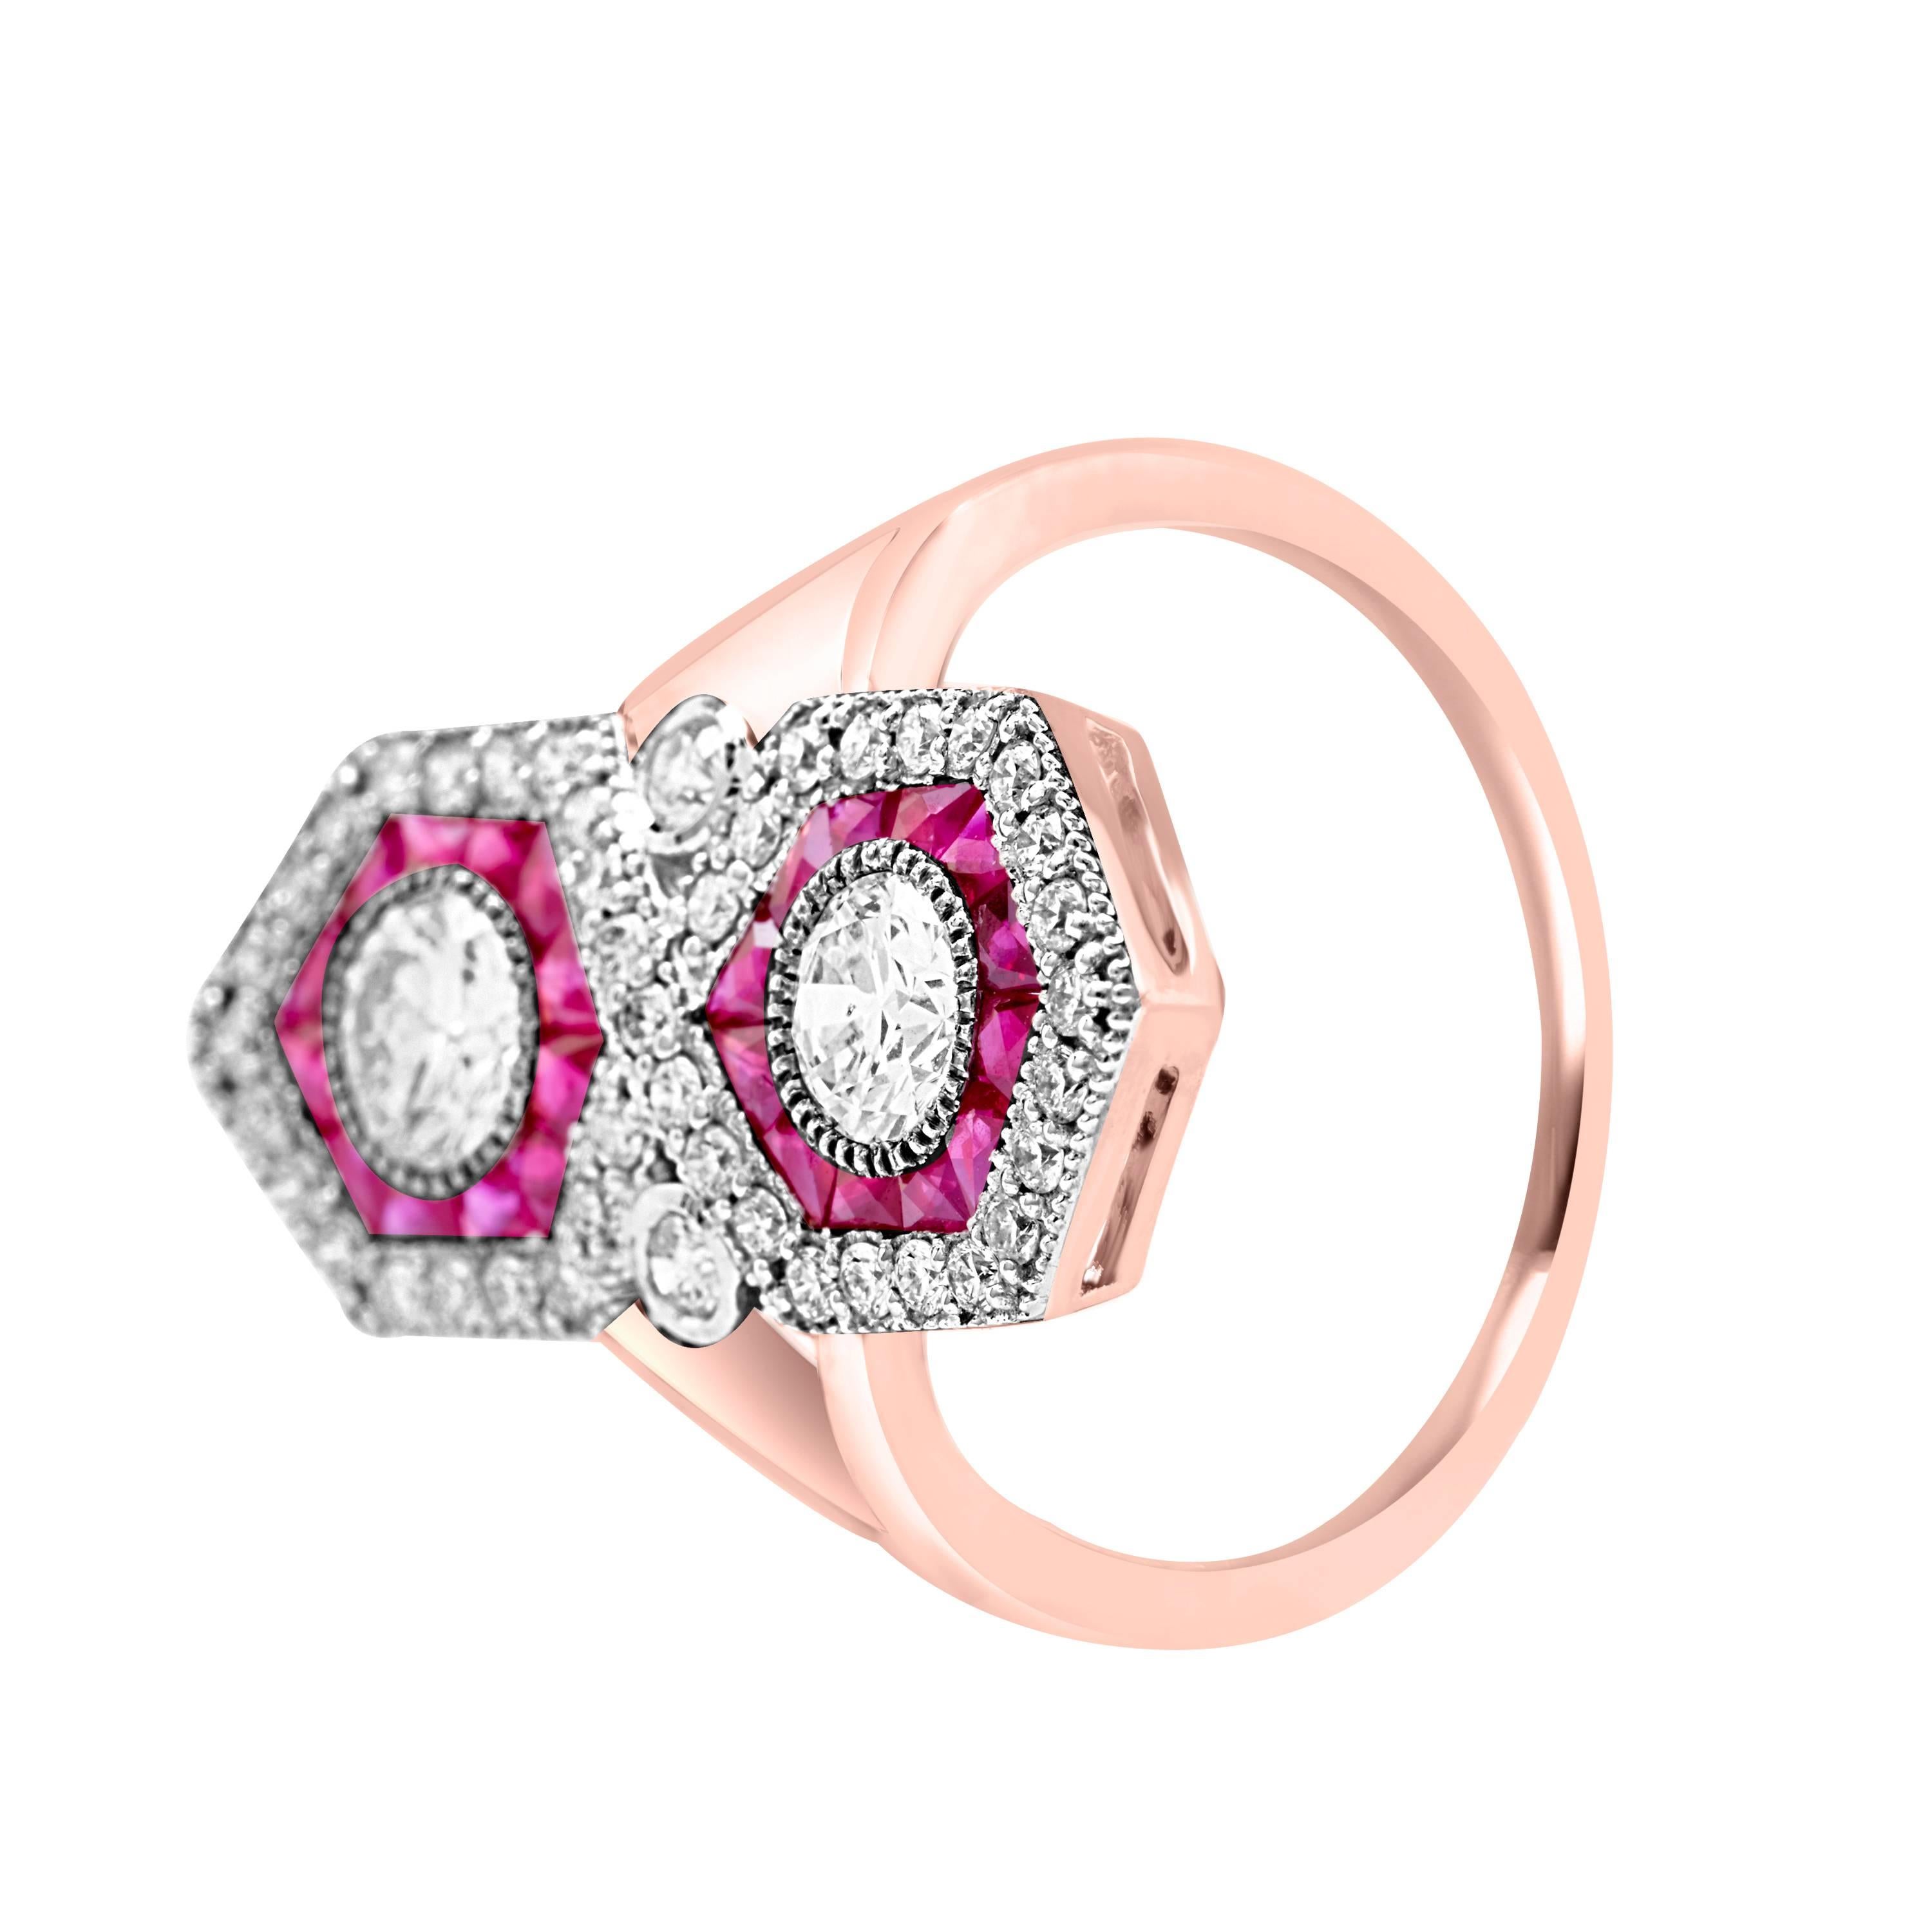 The ring consists of white gold and rose gold channel set fancy cut natural Burmese ruby's surround by beautiful diamonds bezel set handcrafted to perfection. The ring is a beautiful Natural Diamond elegant to the eye with a Round Brilliant Cut.